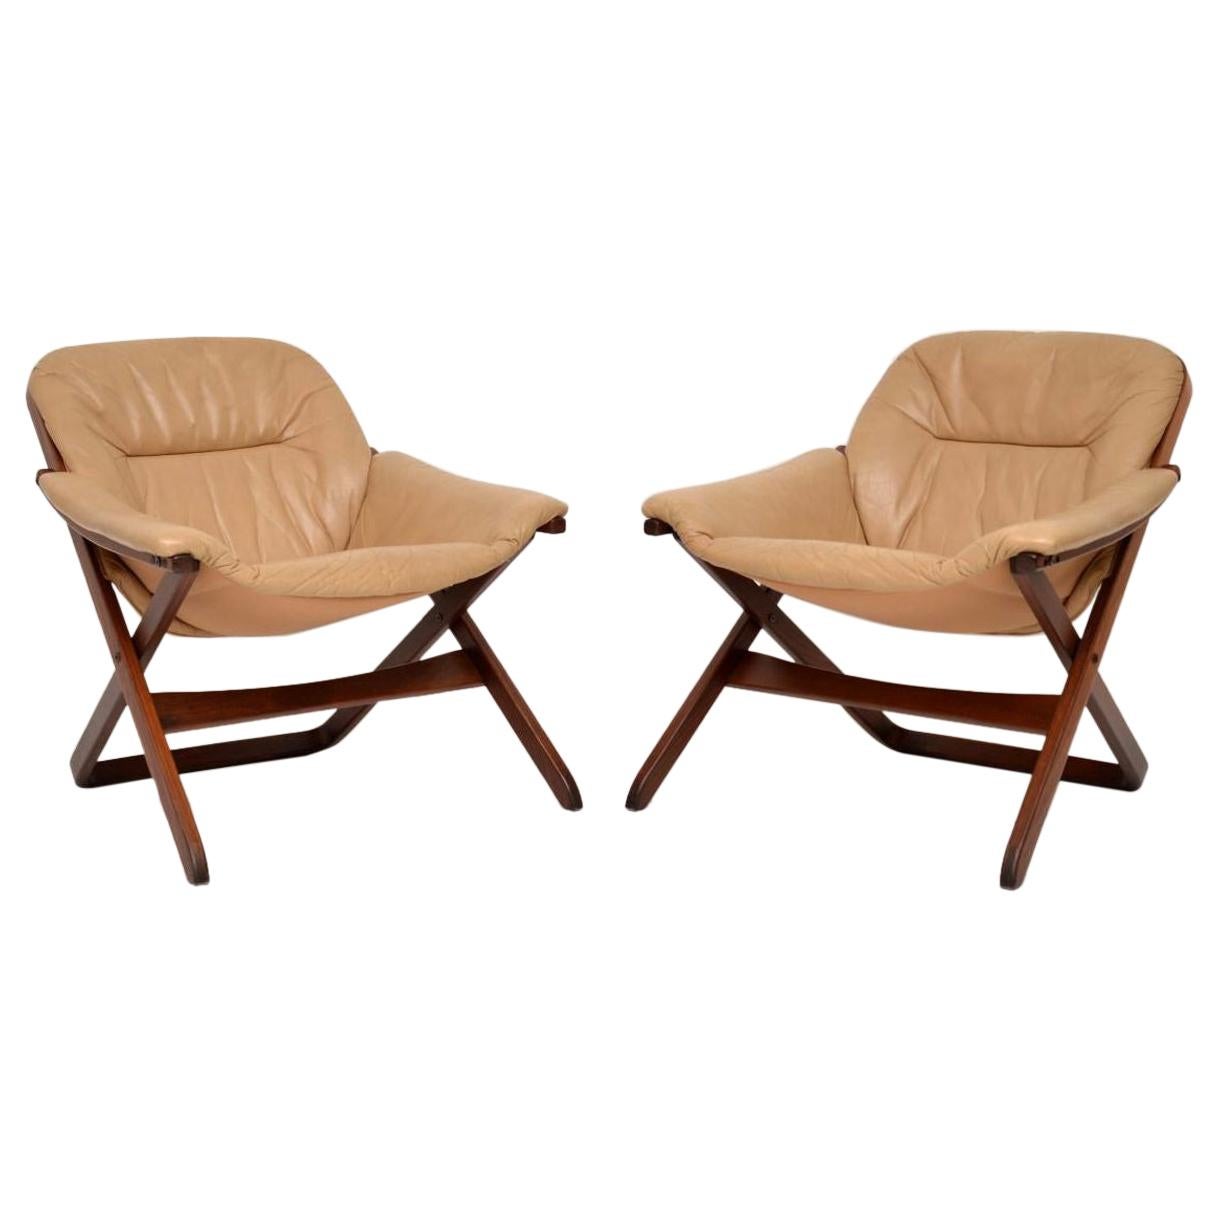 1970s Pair of Swedish Leather Armchairs